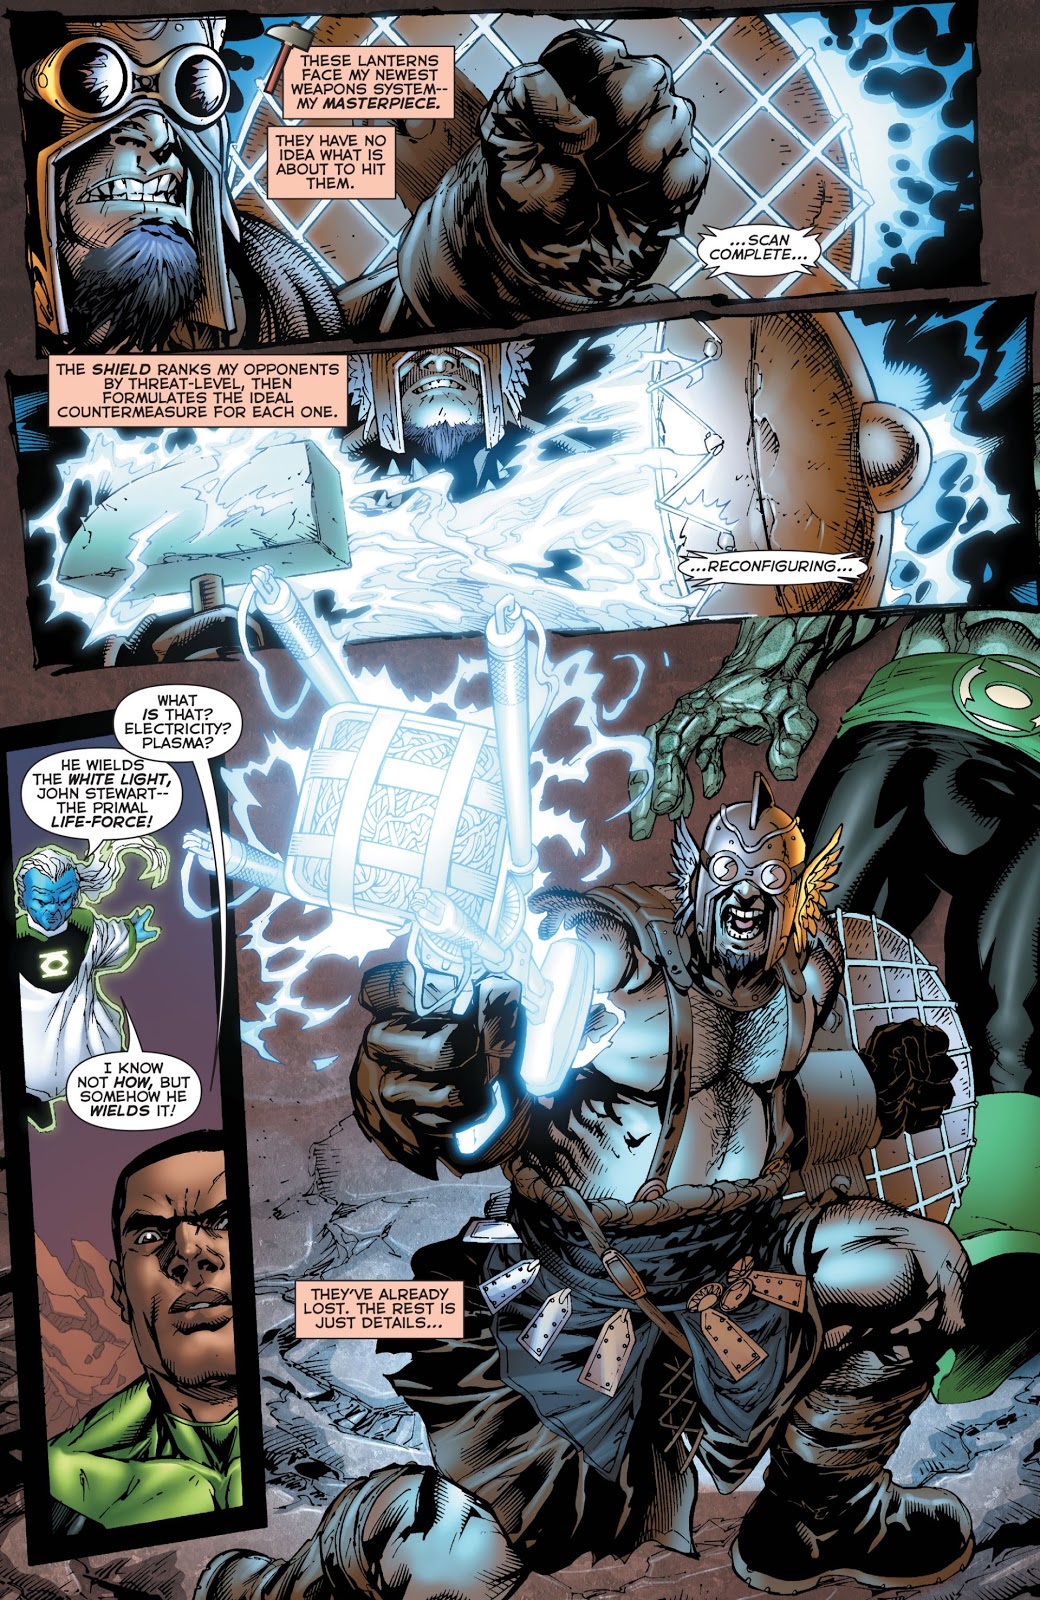 The Weaponer VS The Green Lantern Honor Guard